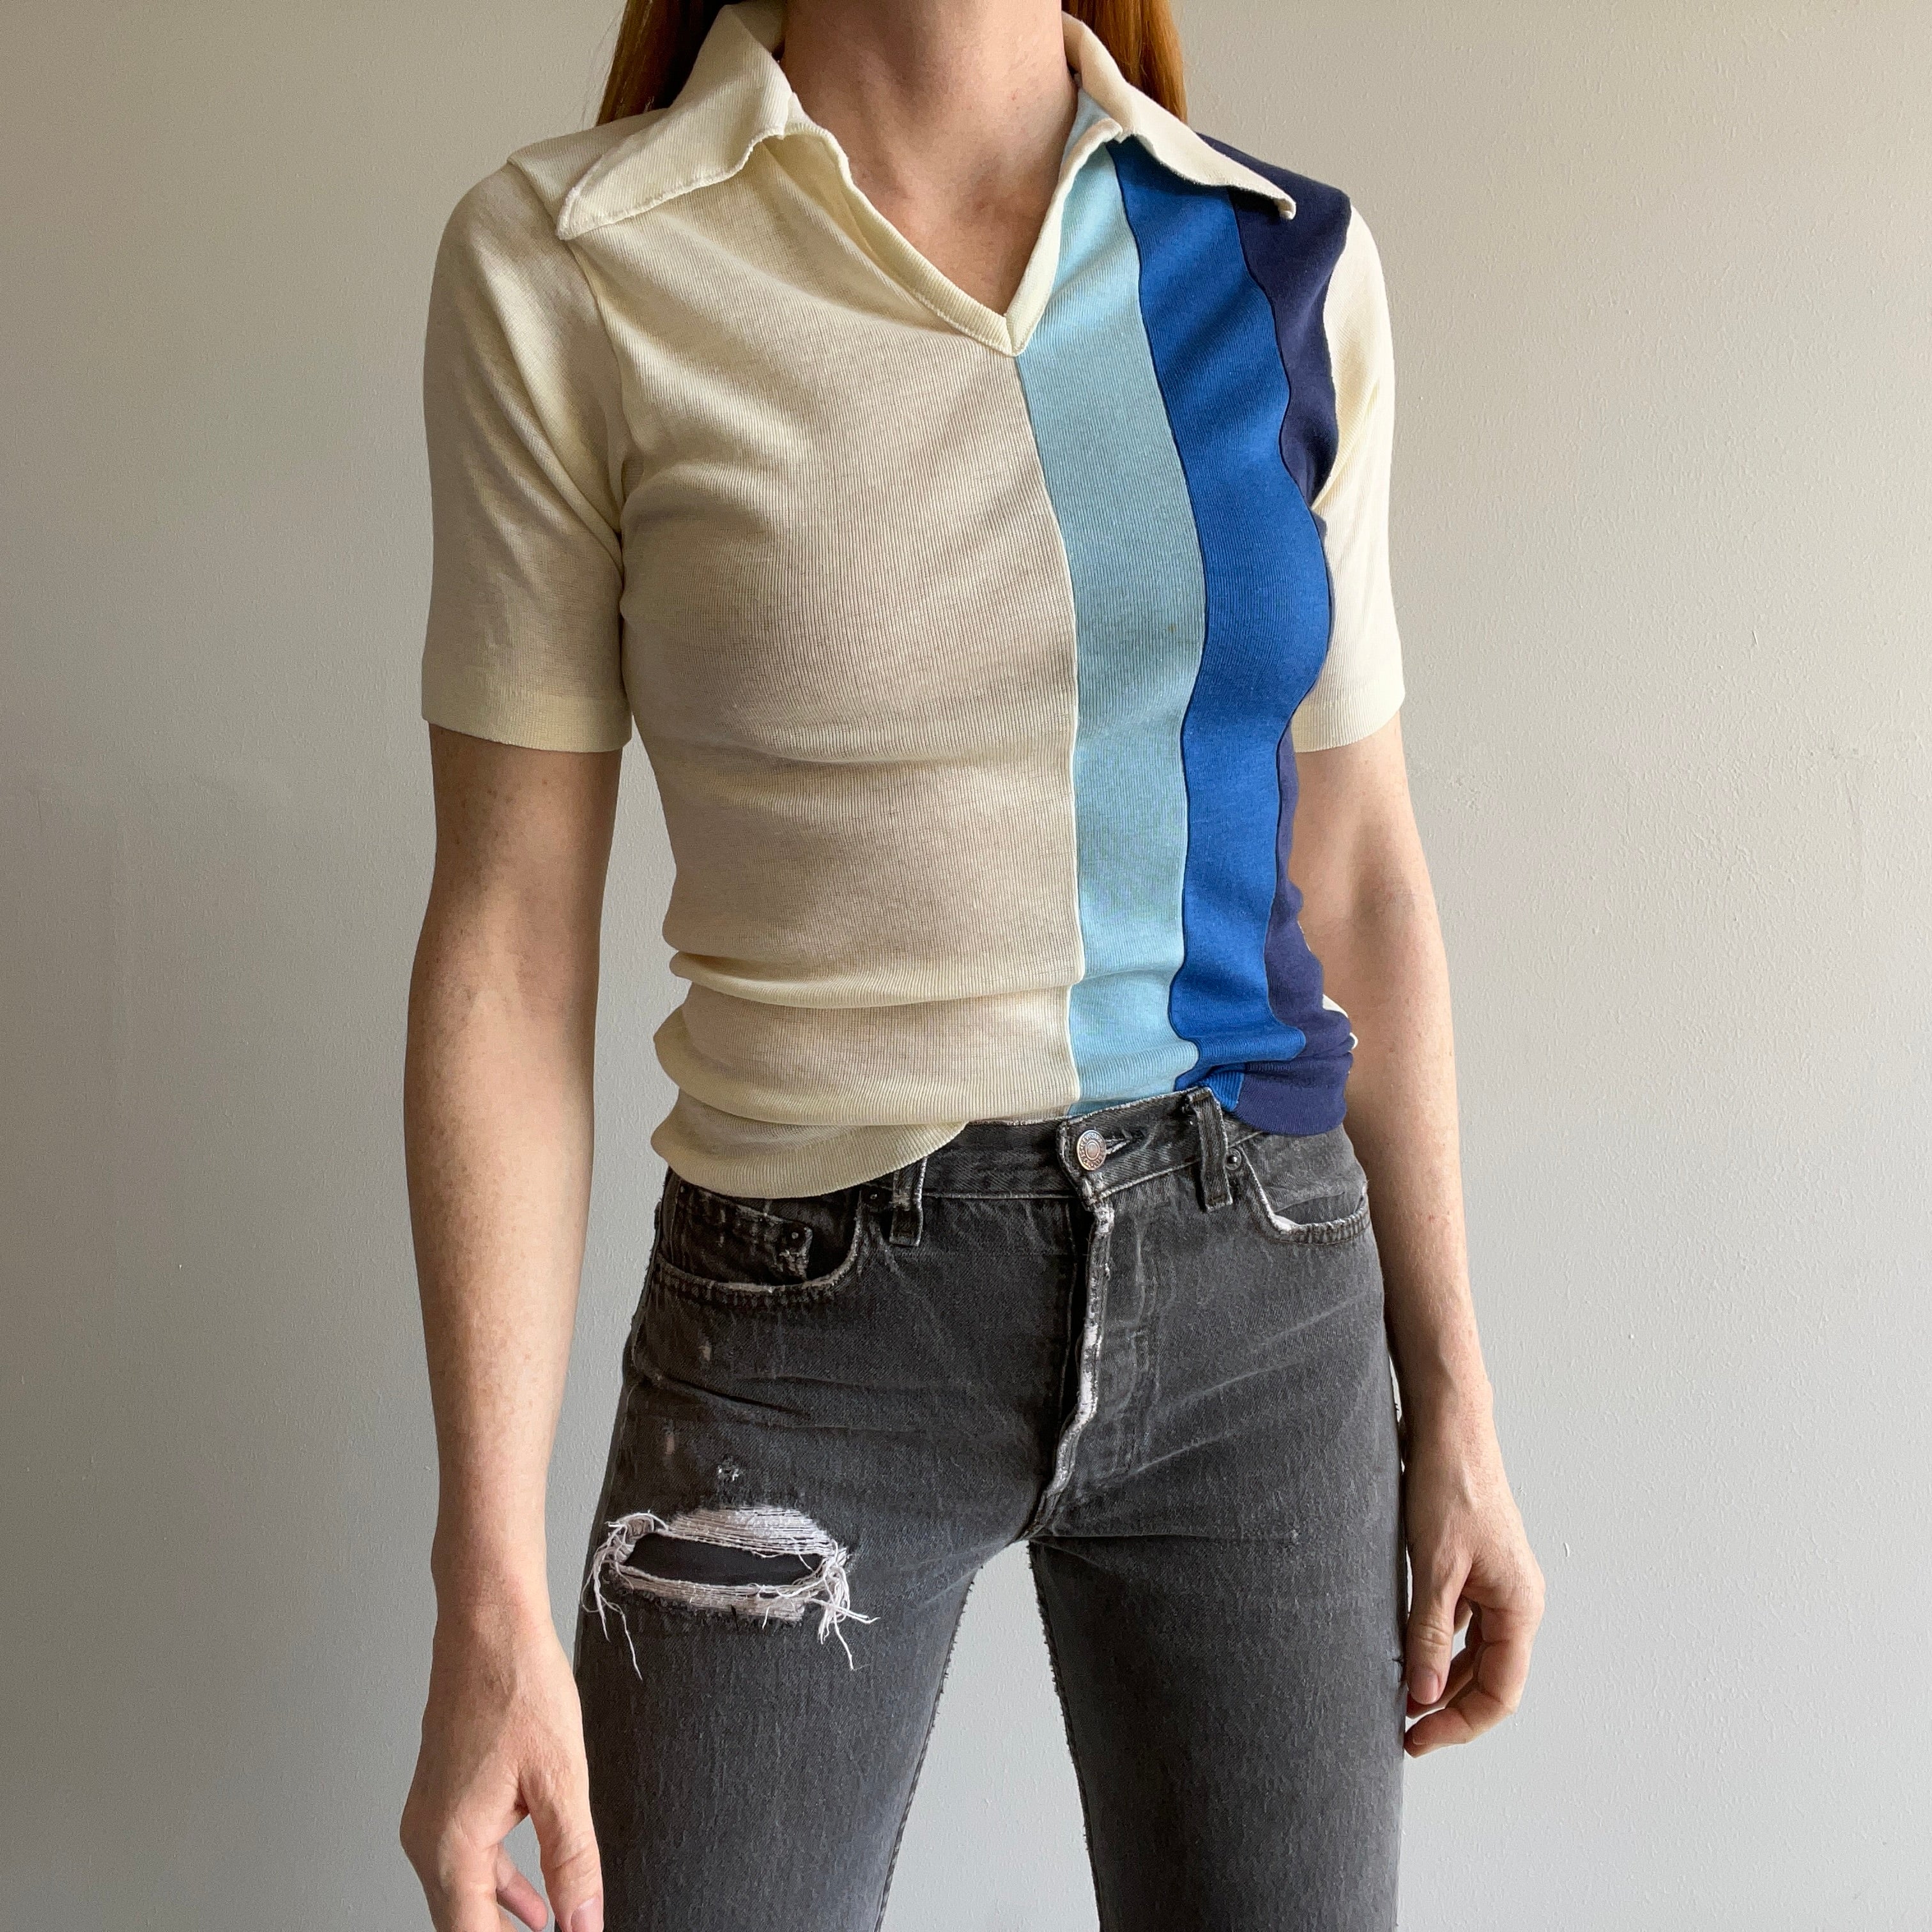 GG 1970s Triple Stripe Fitted Knit Shirt